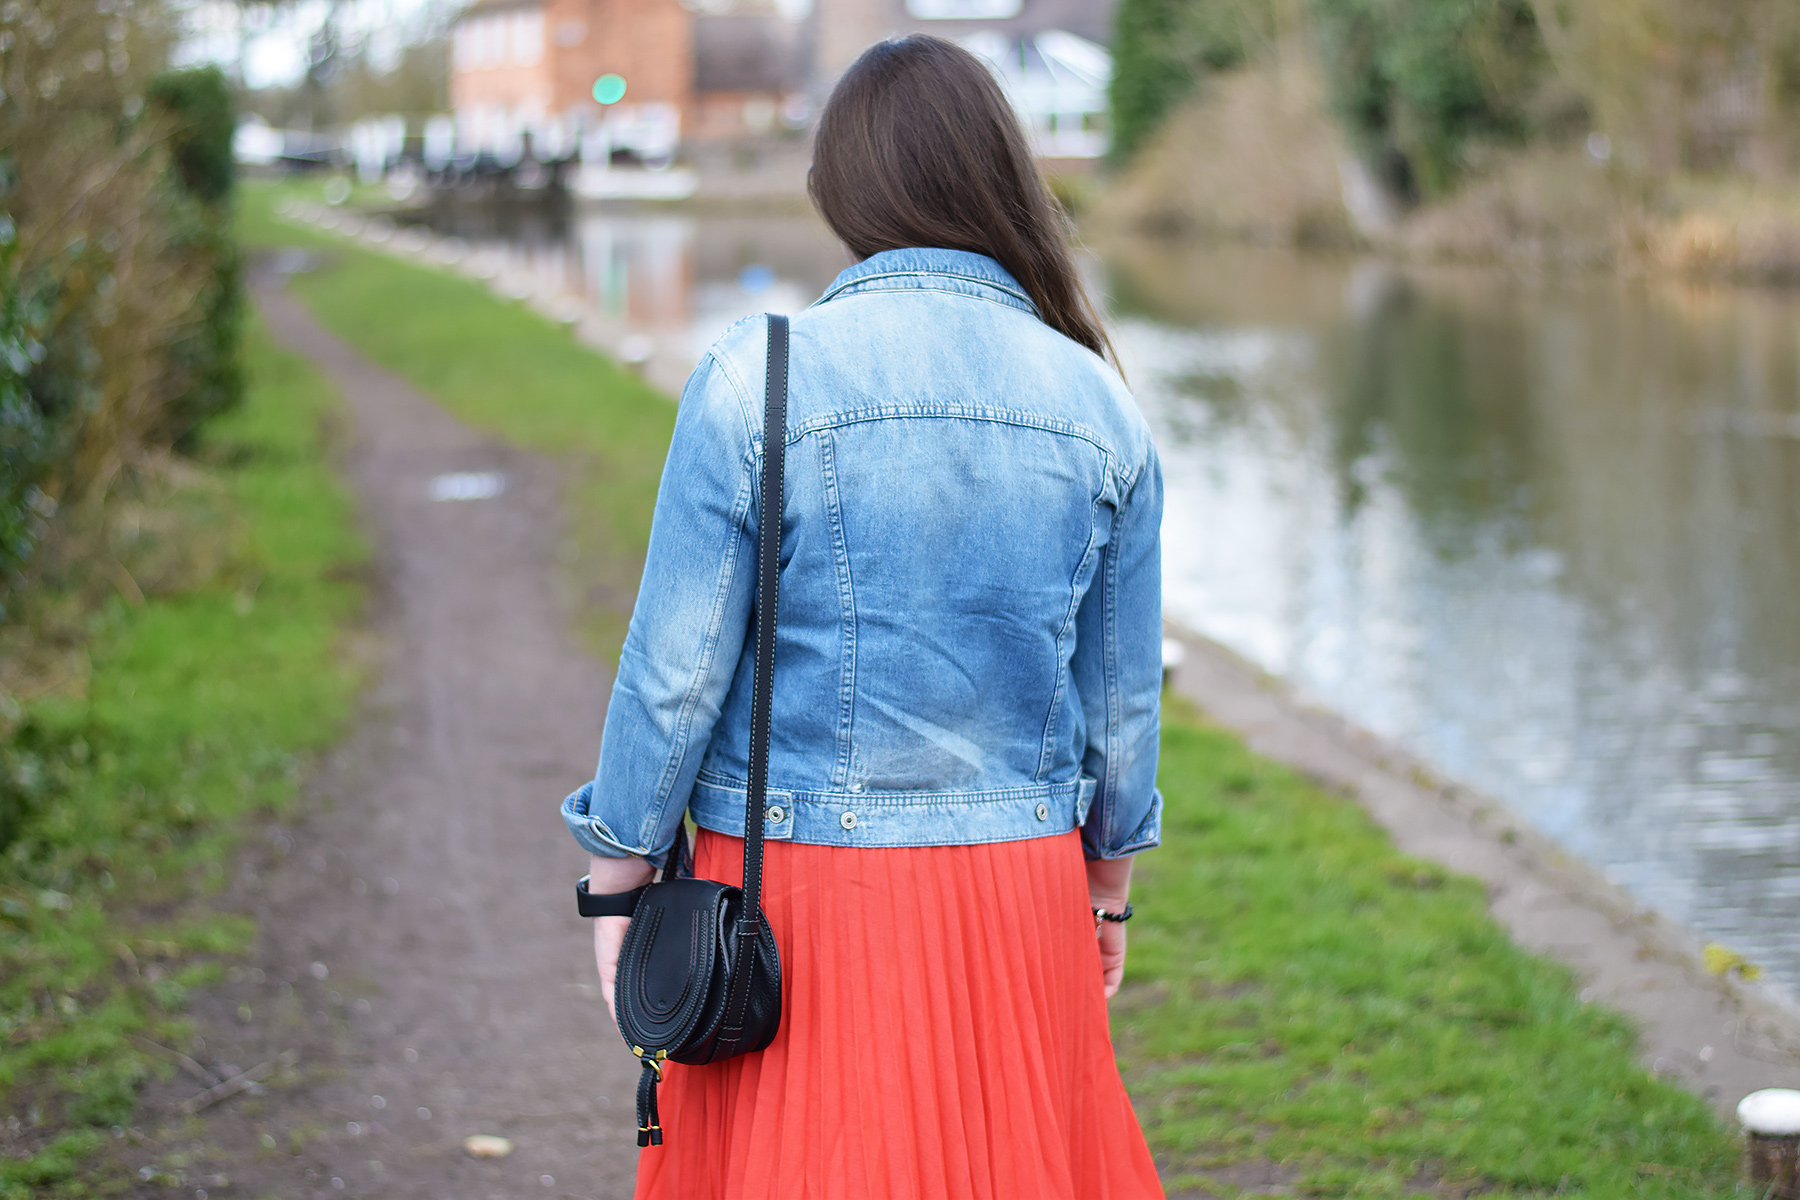 ORANGE AND DENIM OUTFIT